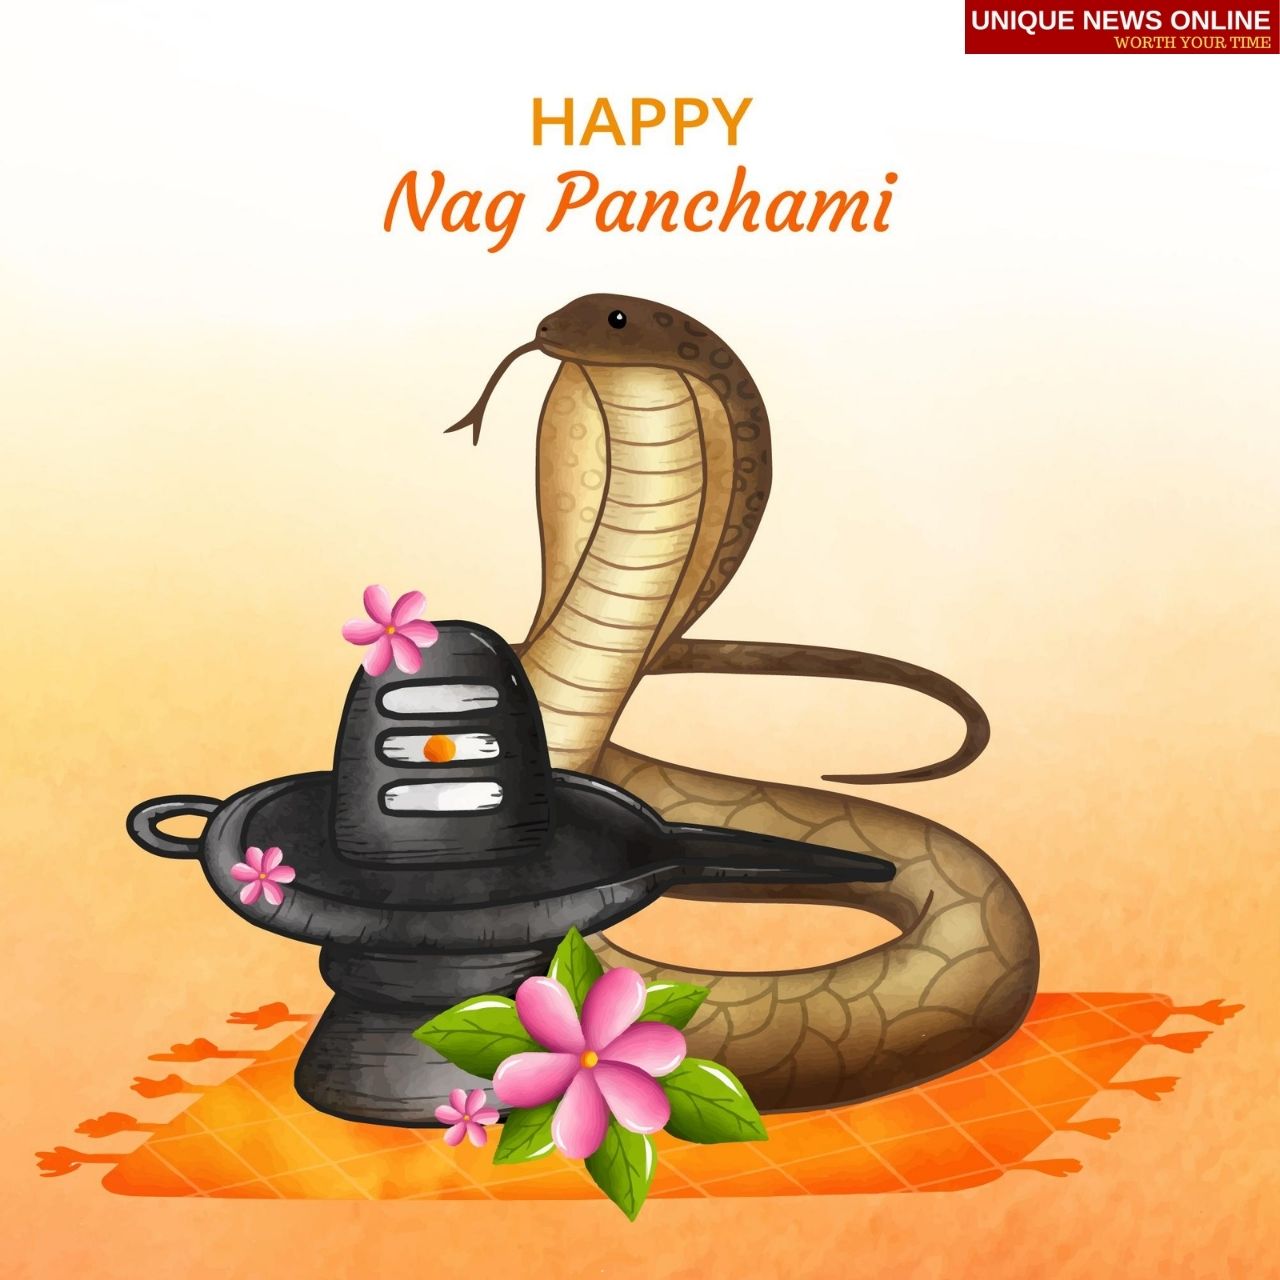 Happy Nag Panchami 2021 WhatsApp Status Video to Download to greet your Loved Ones